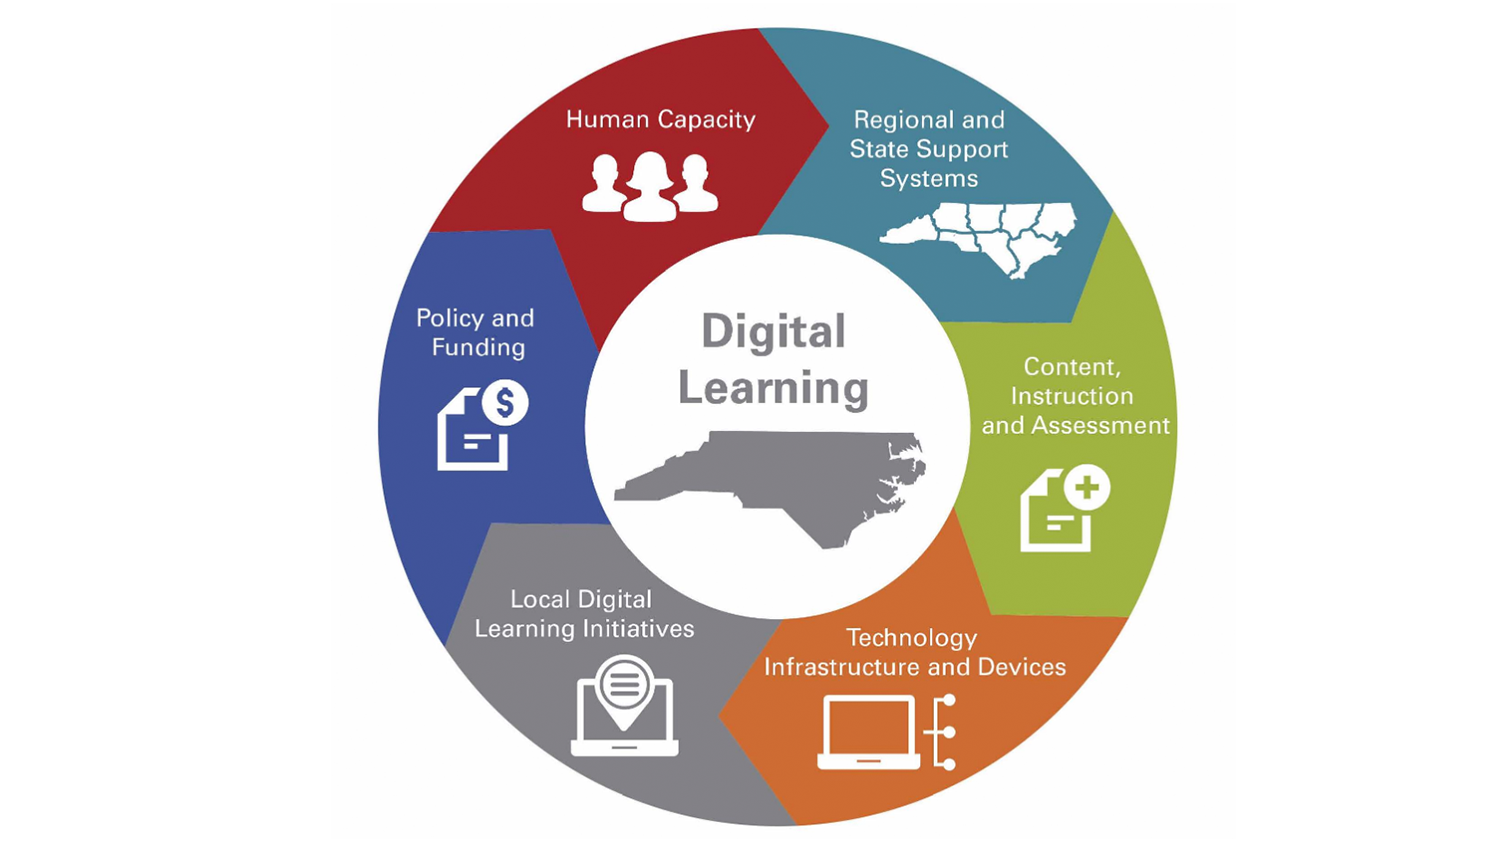 The six guiding principles of the North Carolina Digital Learning Plan